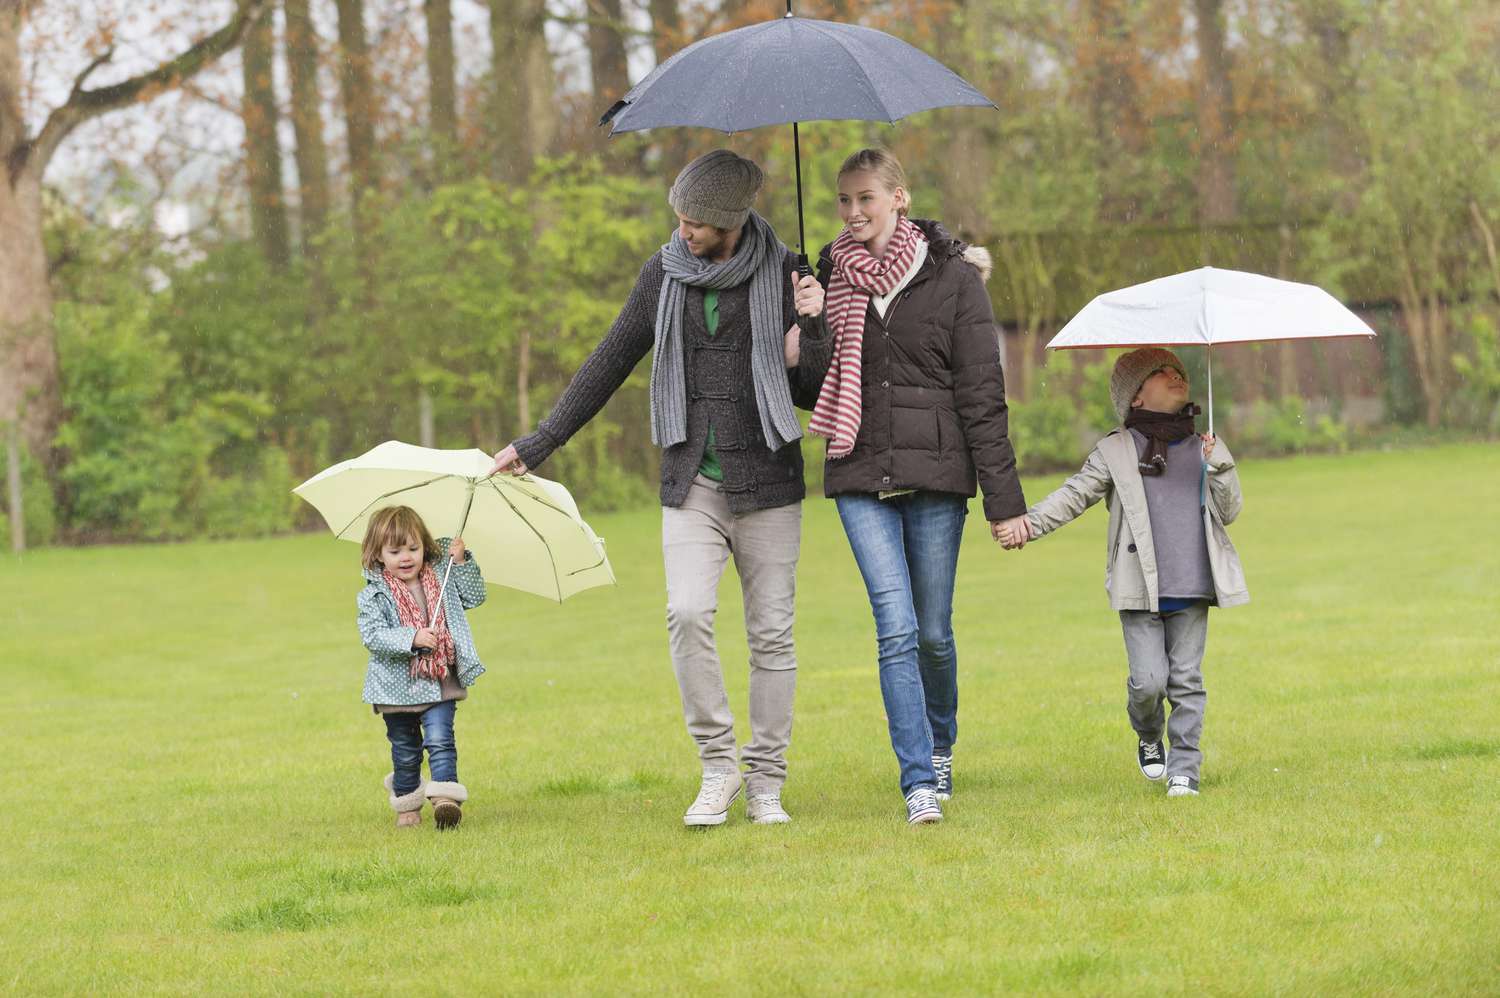 Family walking with umbrellas in a park